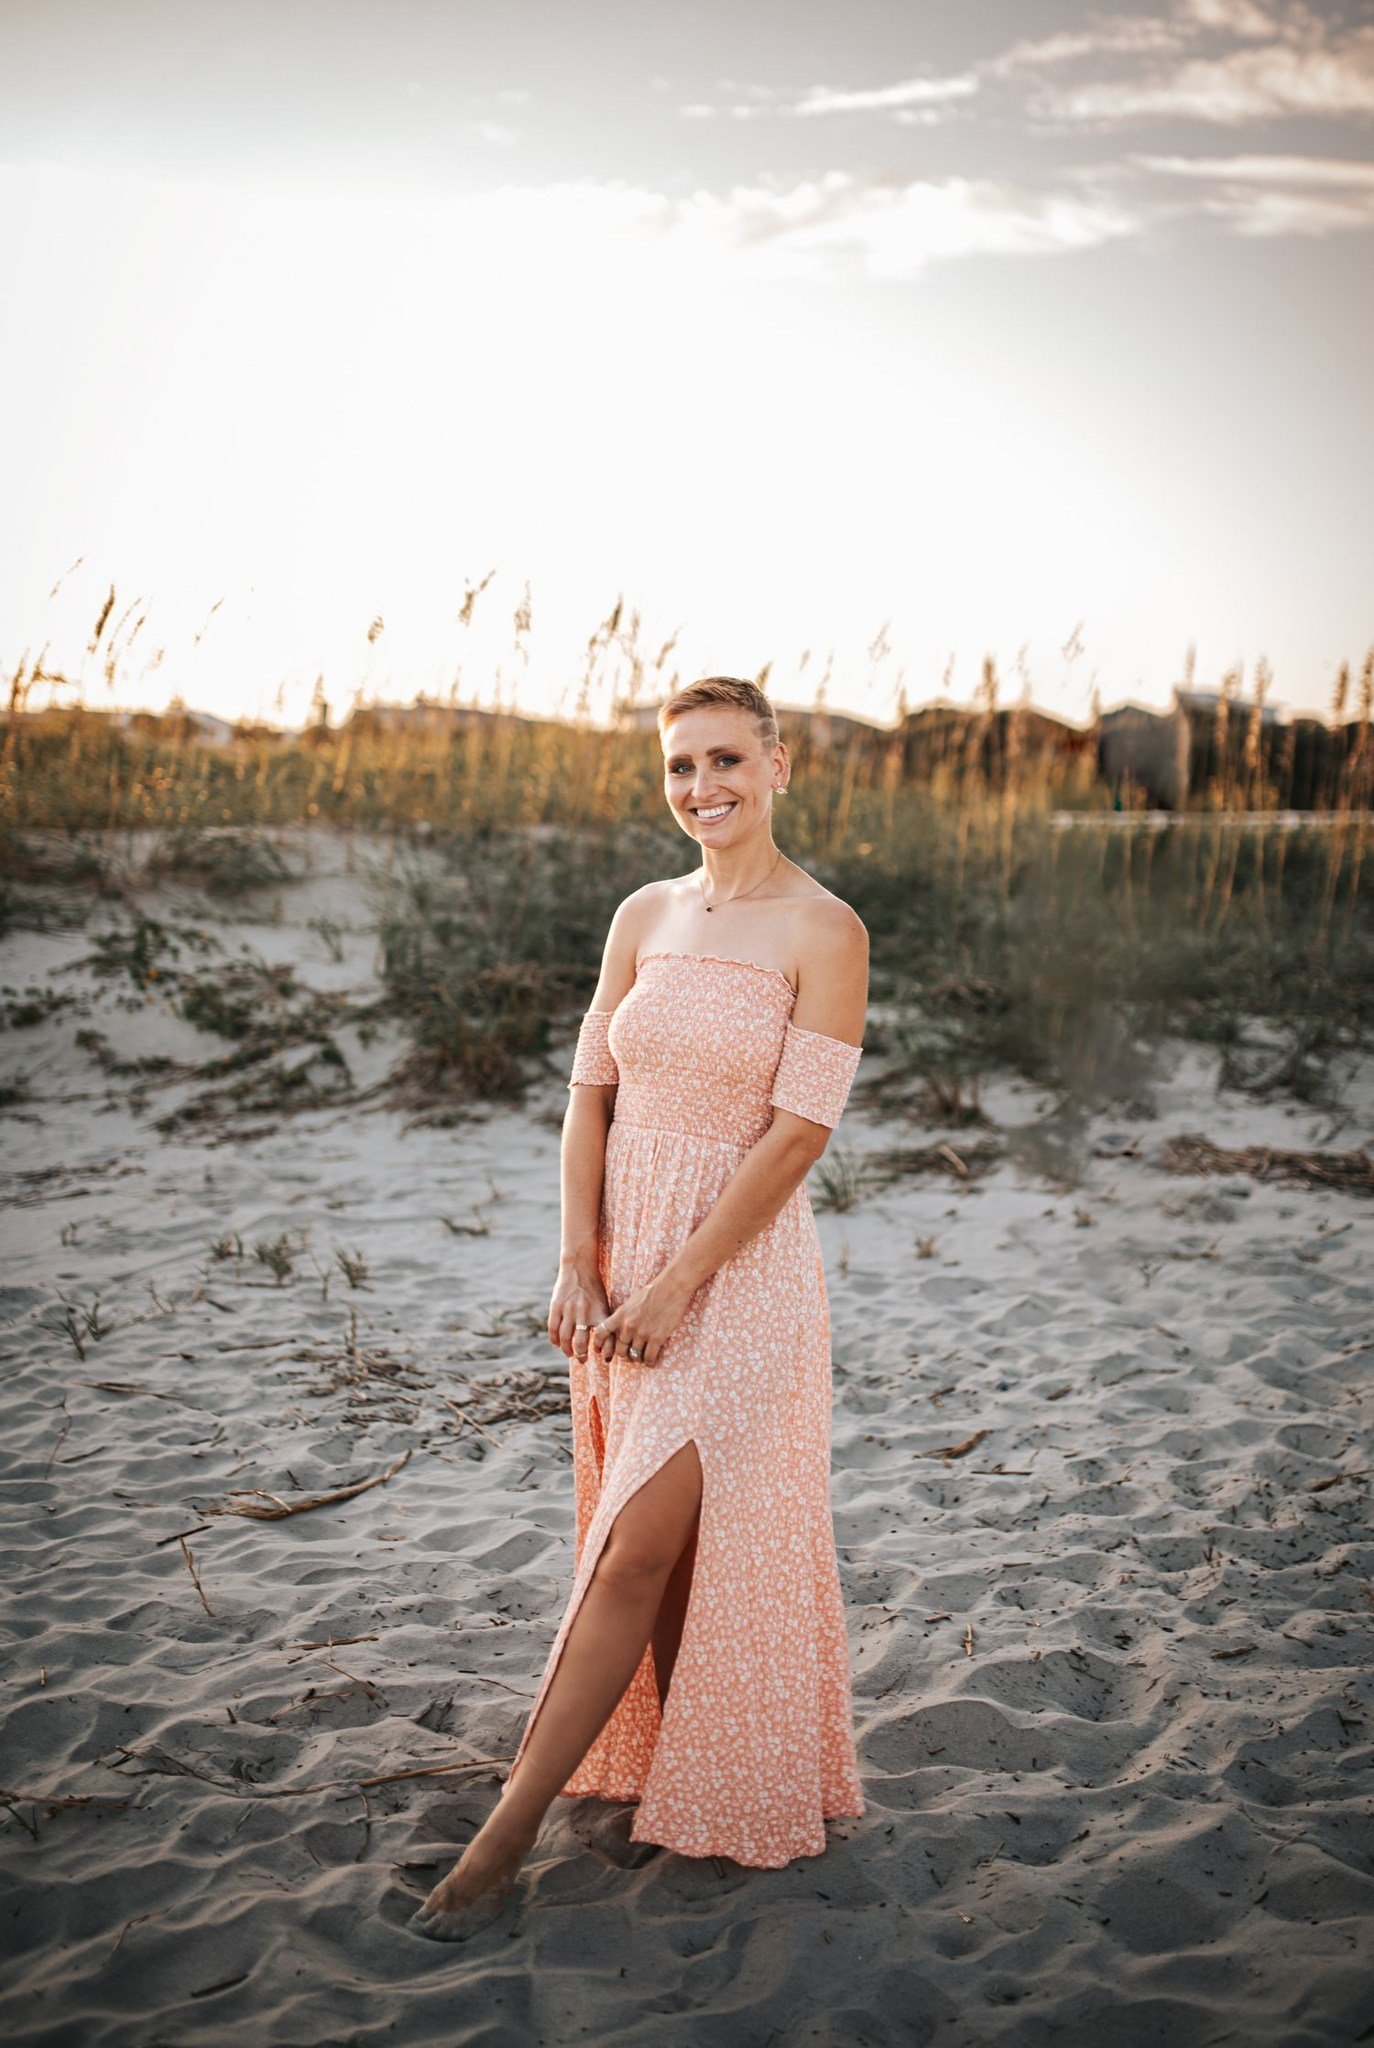 Summer is around the corner, and I couldn't be more excited for the upcoming sessions on my calendar! 🌞 

It's a joy to reconnect with some of my favorite repeat families, capturing their milestones and memories year after year. Sessions are limited